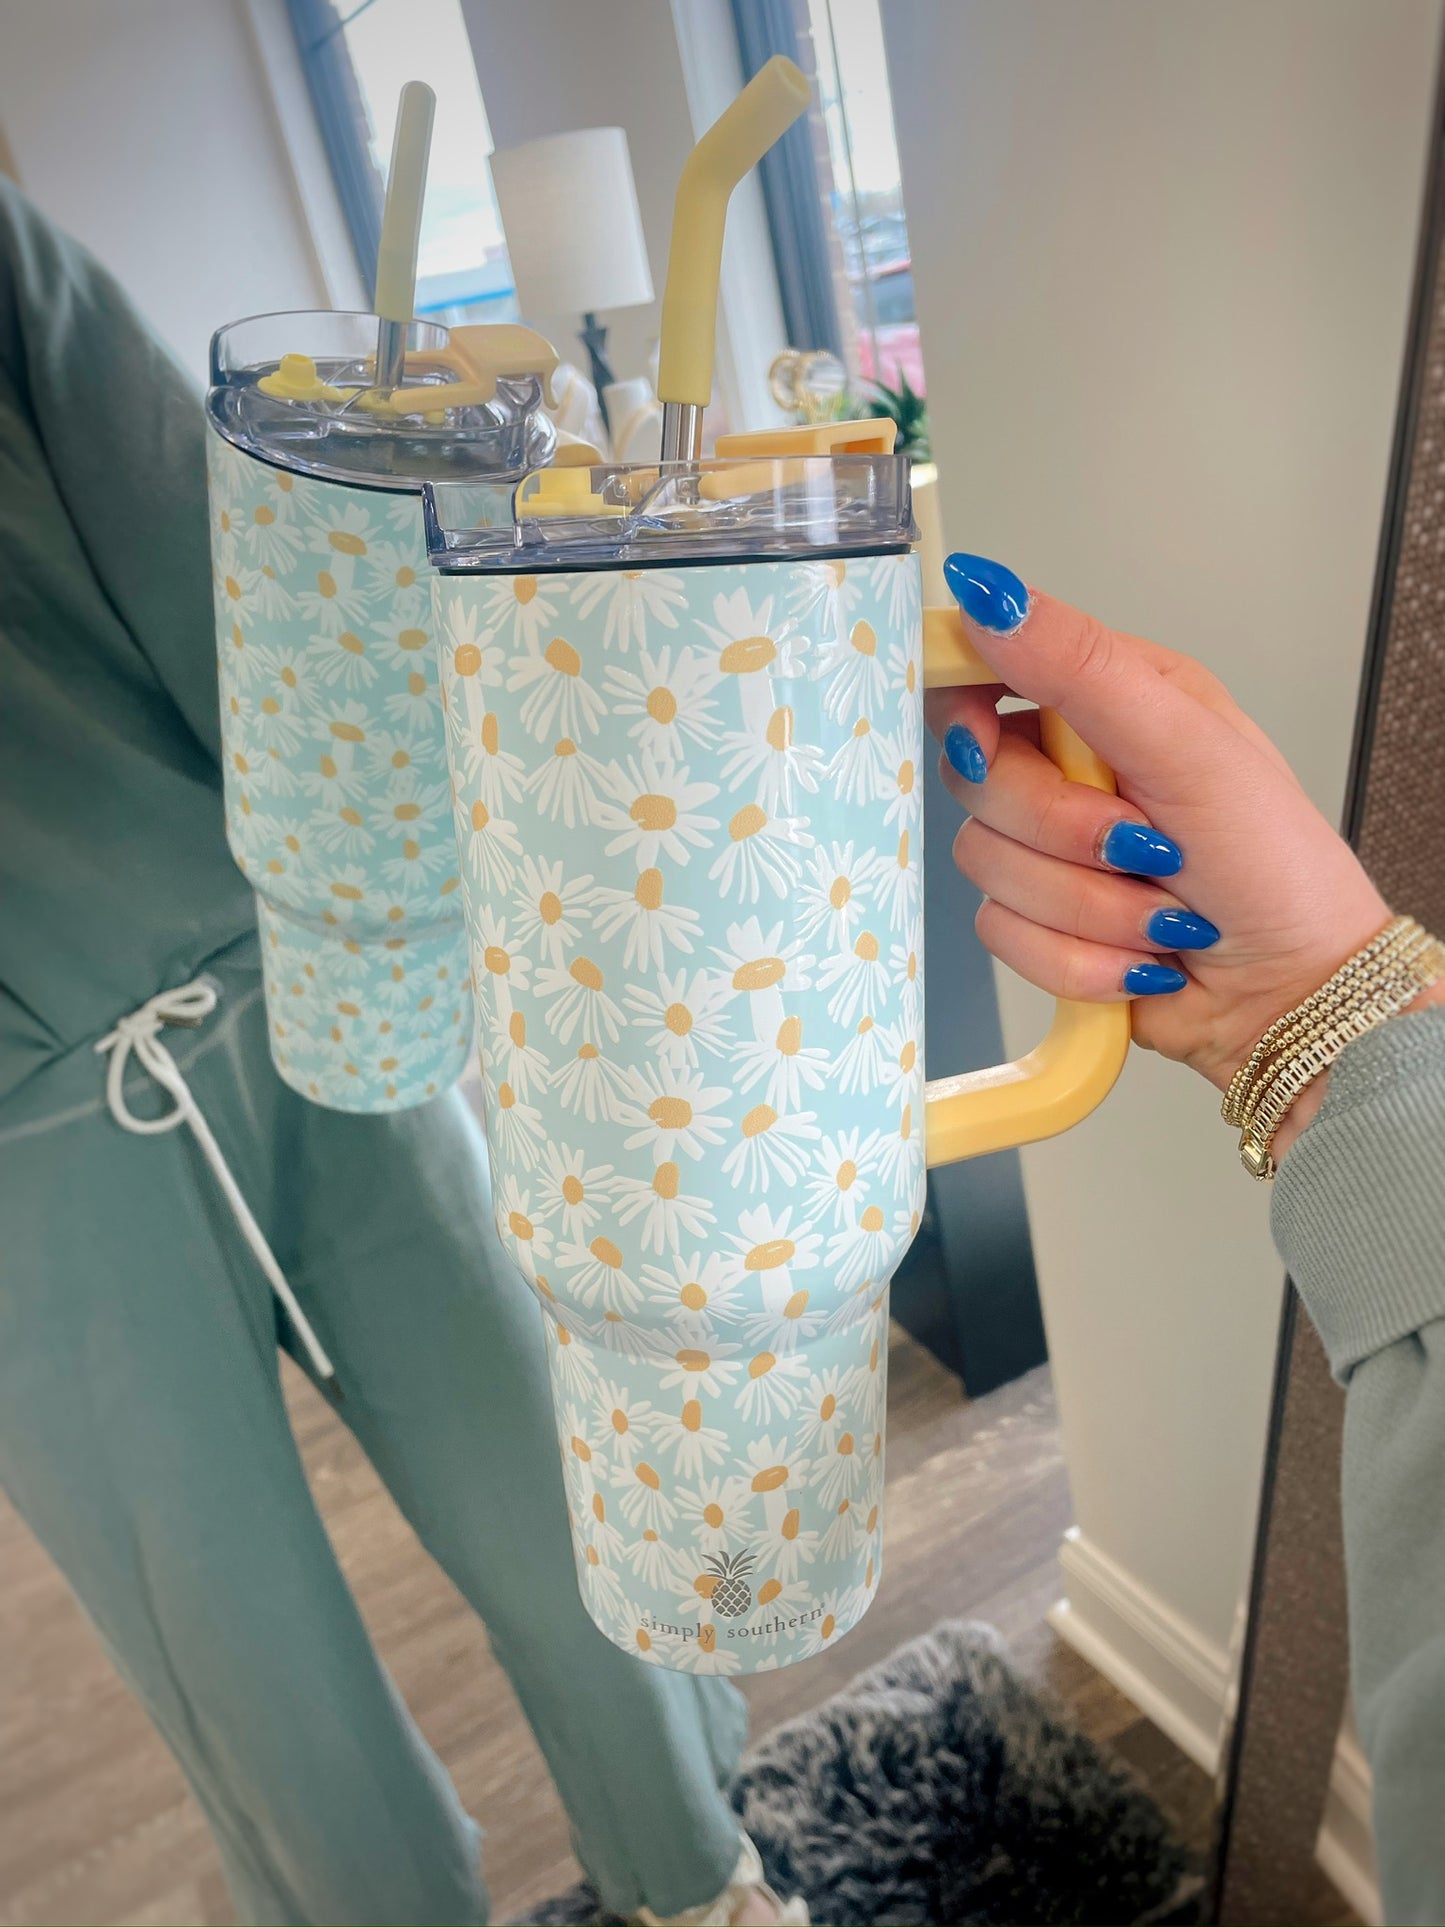 blue tumbler with yellow and white daisies printed on it and a yellow handle